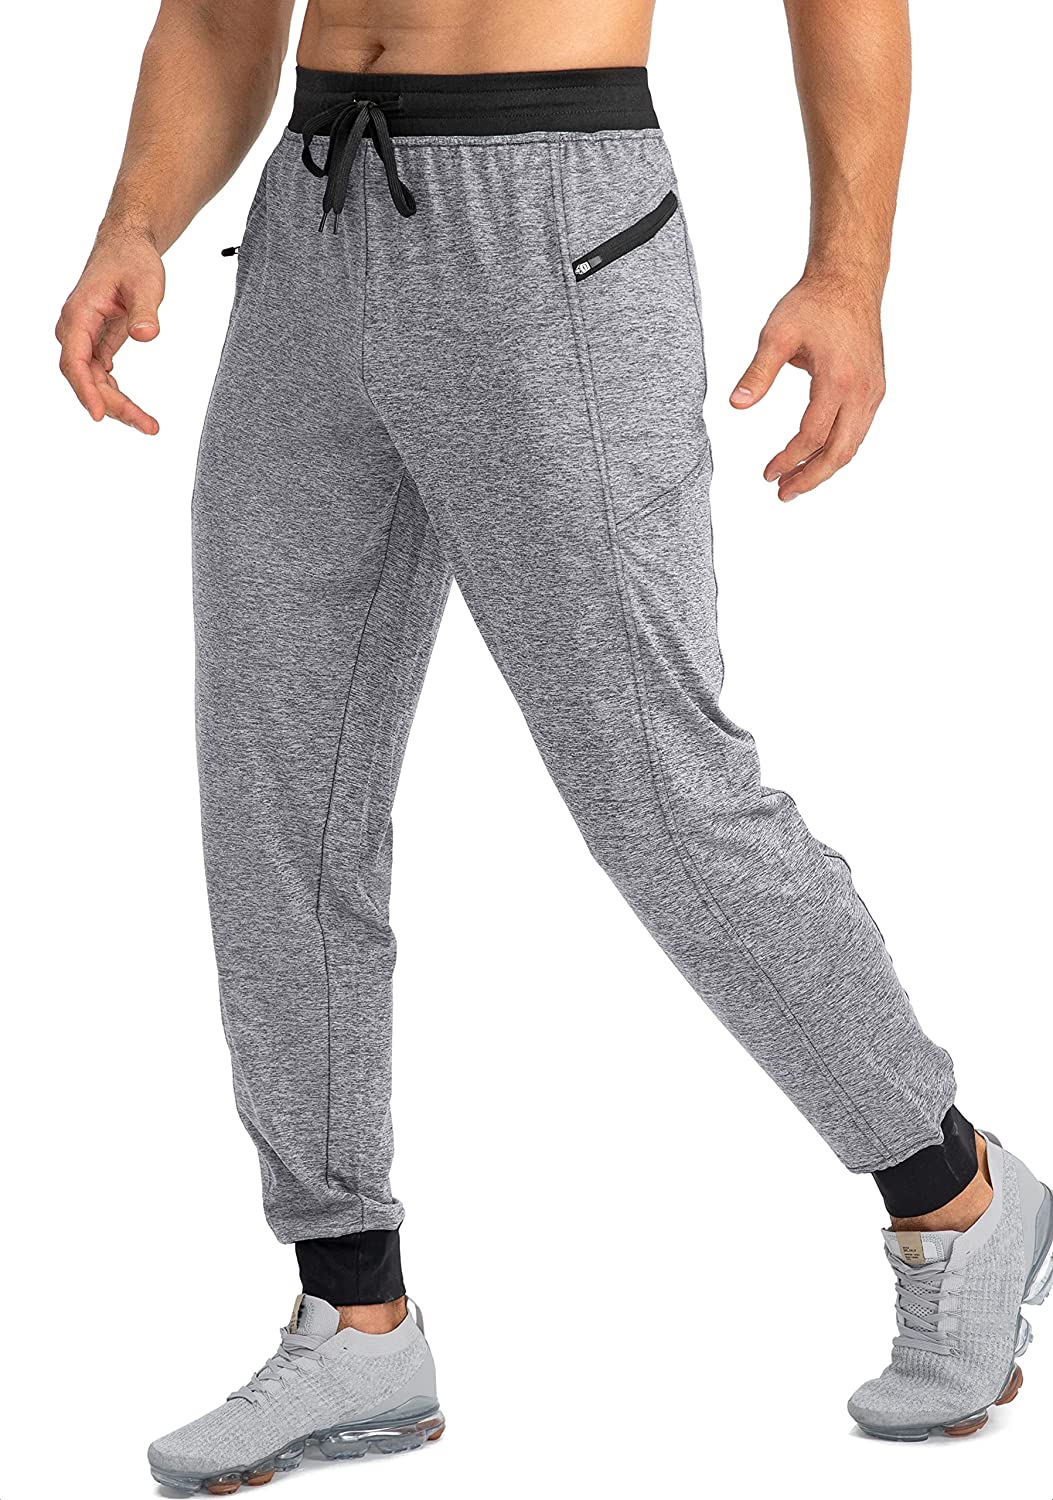 G Gradual Men's Sweatpants with Zipper Pockets Athletic Pants Traning Track  Pants Joggers for Men Soccer, Running, Workout